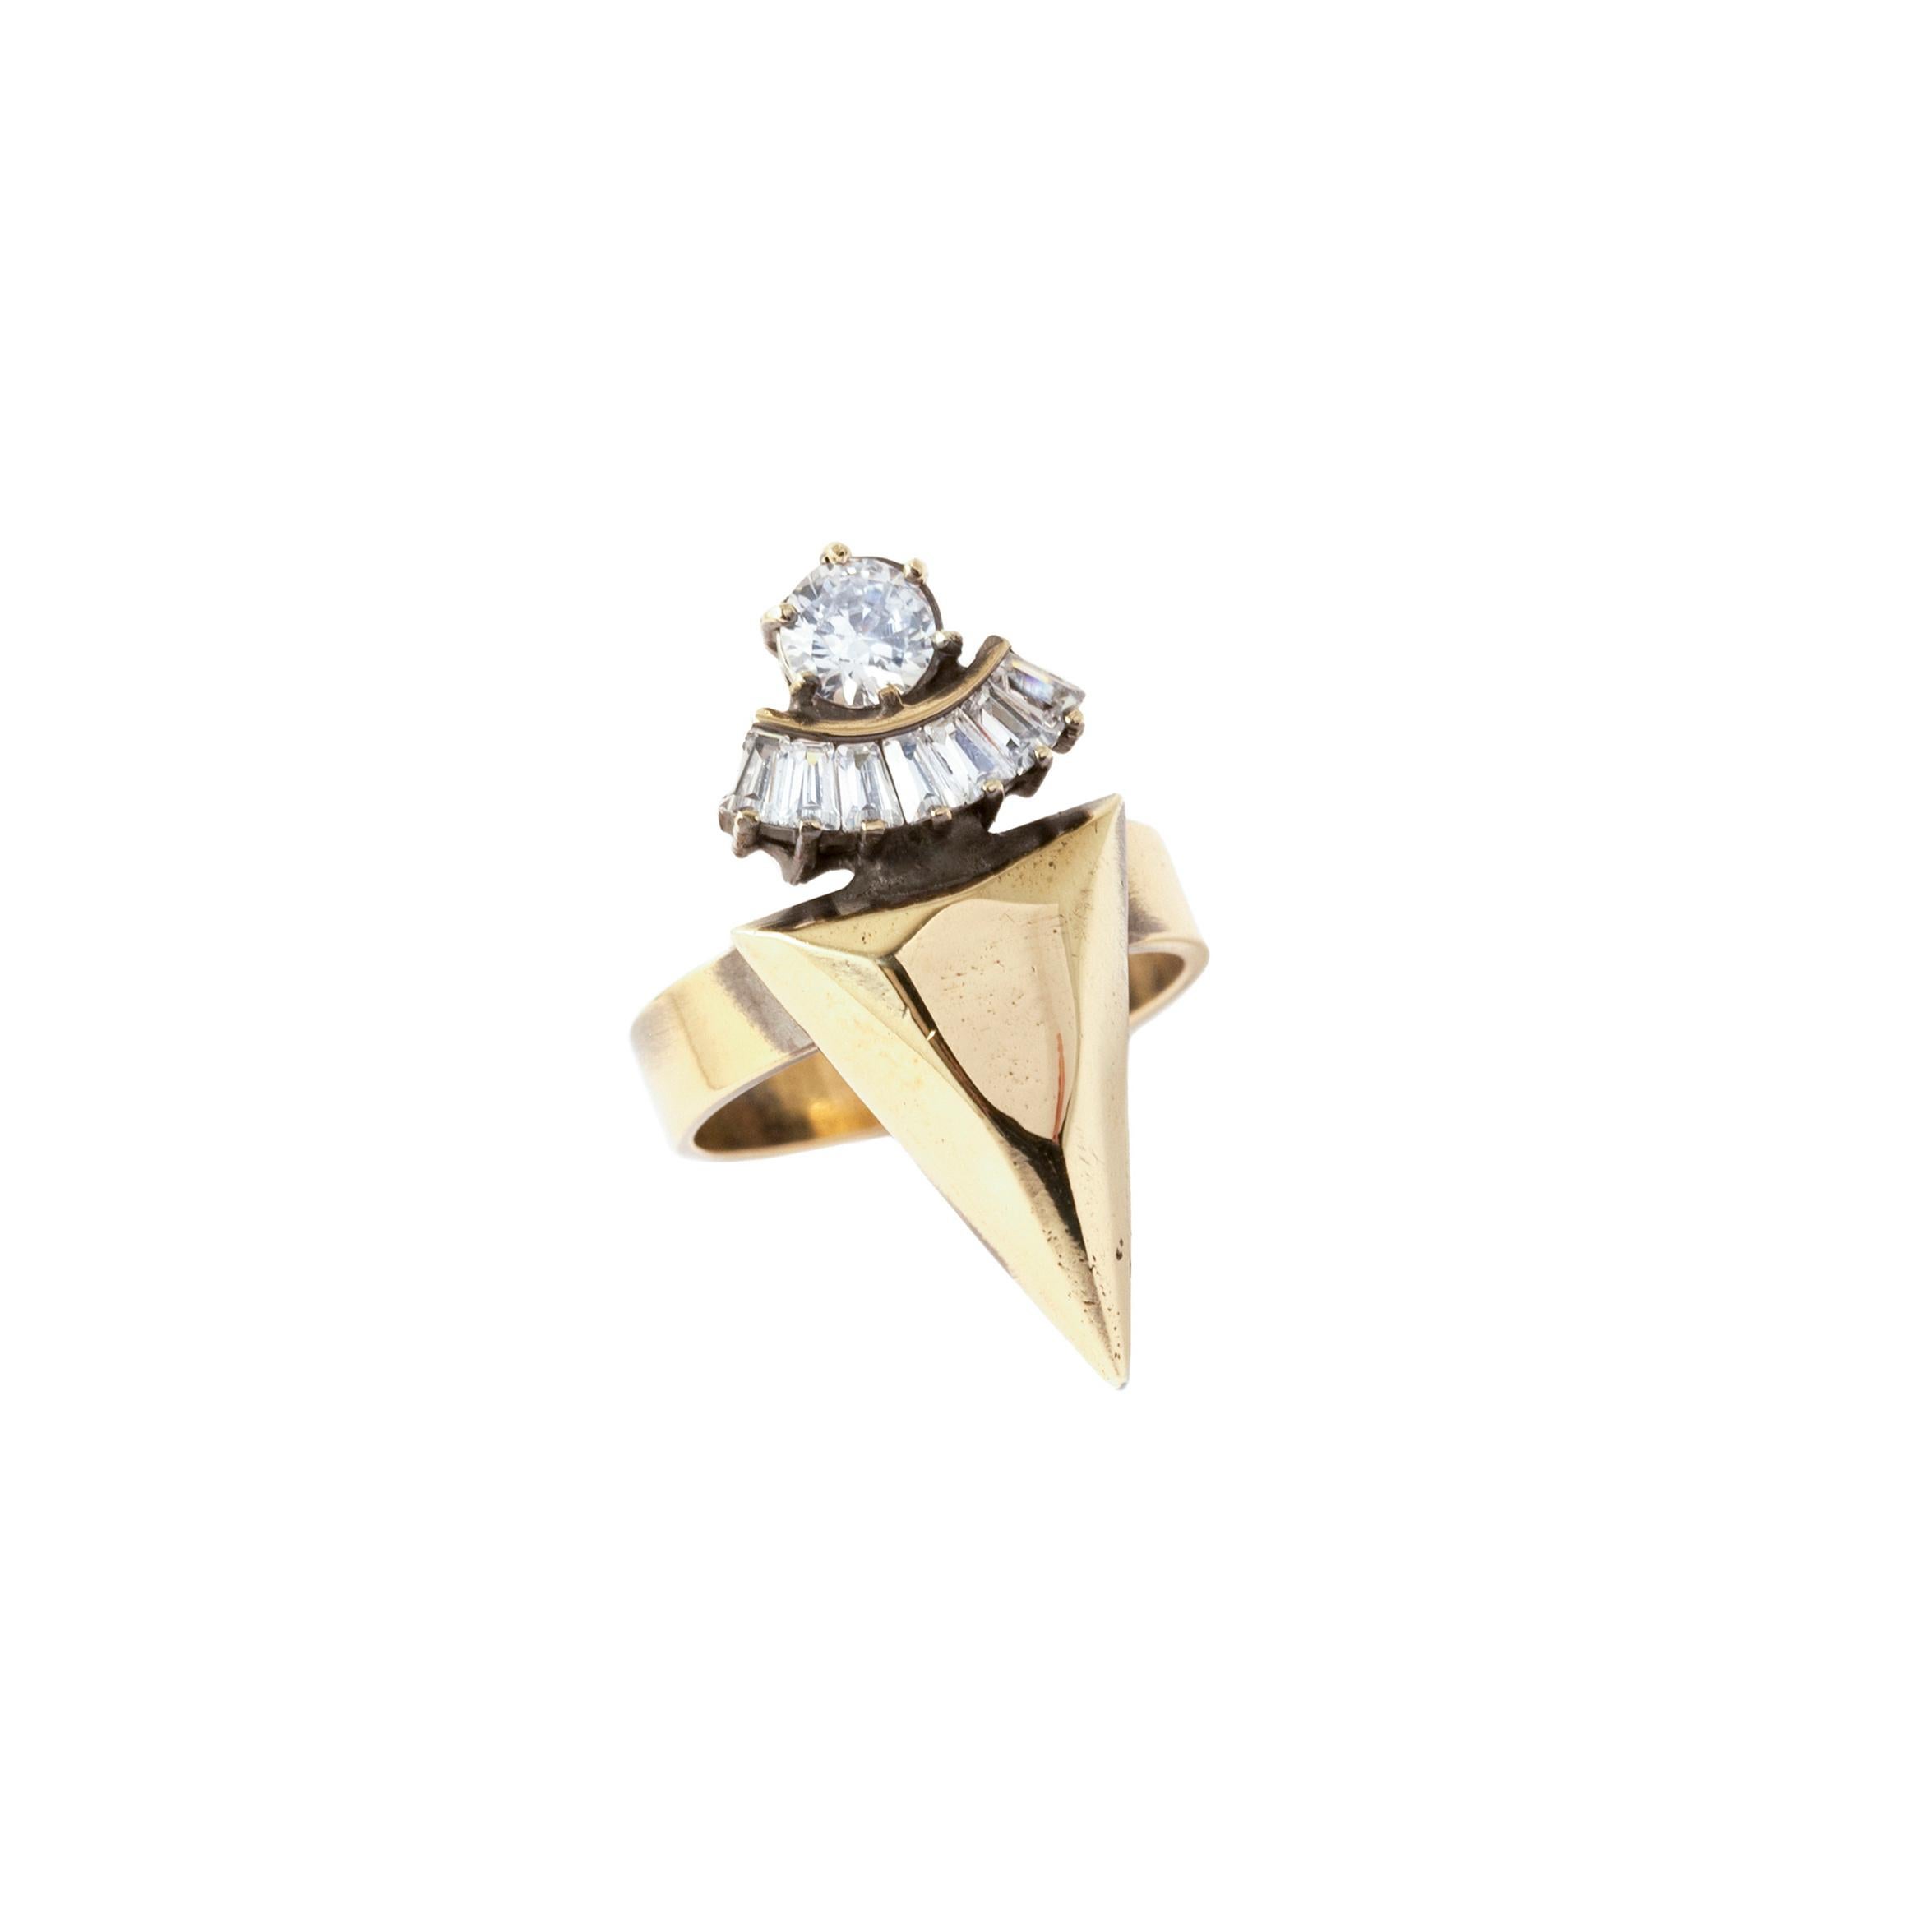 Contemporary Iosselliani Crystal Spiked Ring For Sale